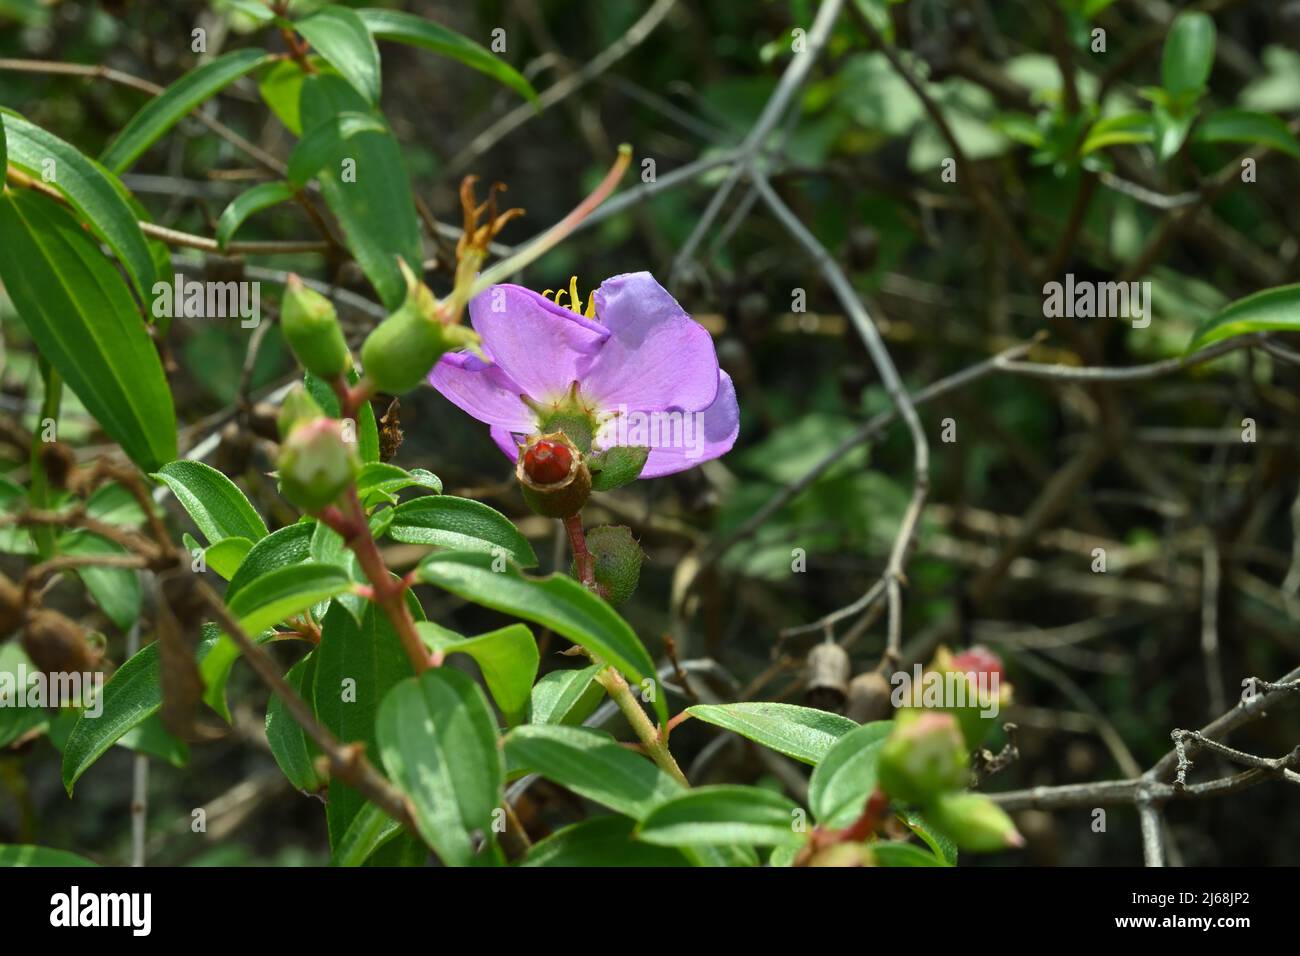 A bloom purple Eight stamen Osbeckia flower with seed capsules, beautiful view from back through leaves and twig Stock Photo